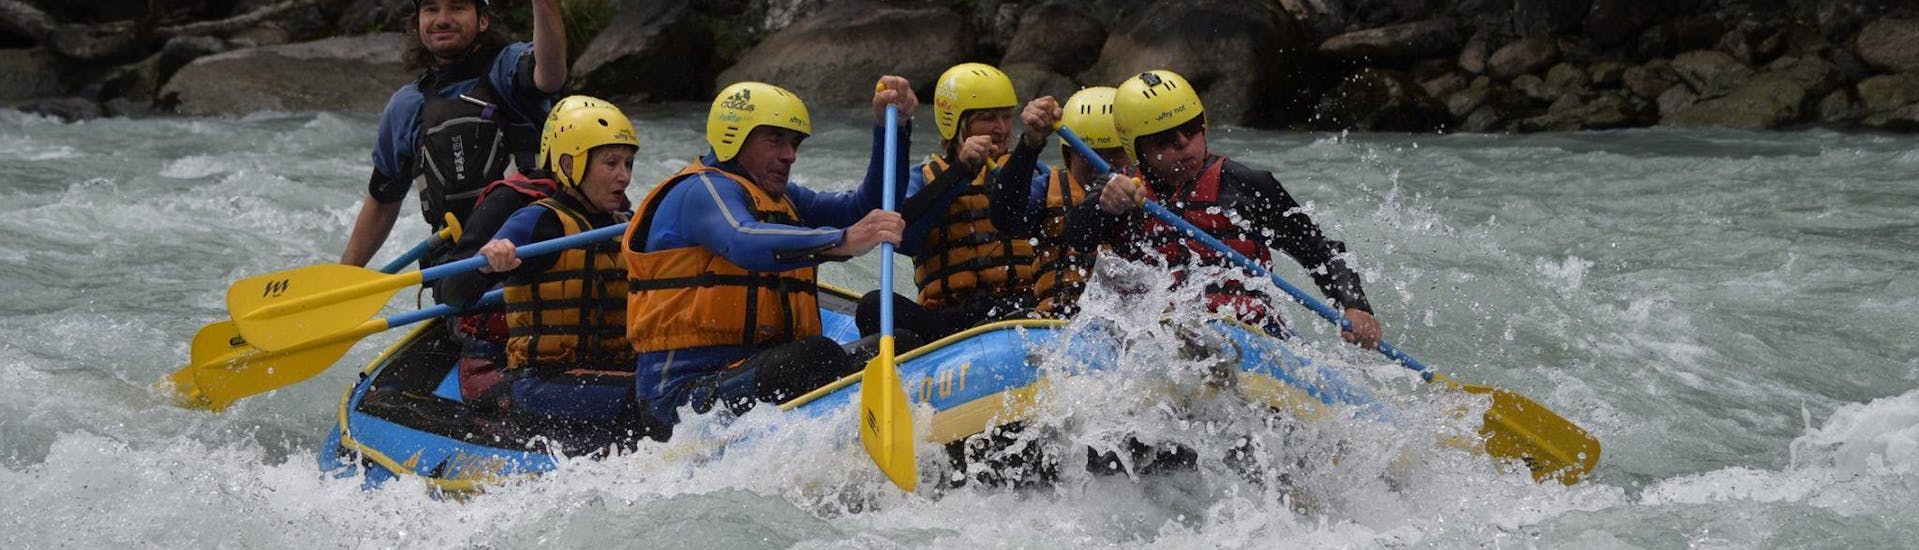 During the rafting "Extreme Tour" through Landeck Canyon, a group of rafting enthusiasts is concentrating on paddling through rapids with a certified rafting guide from WhyNot Adventures.